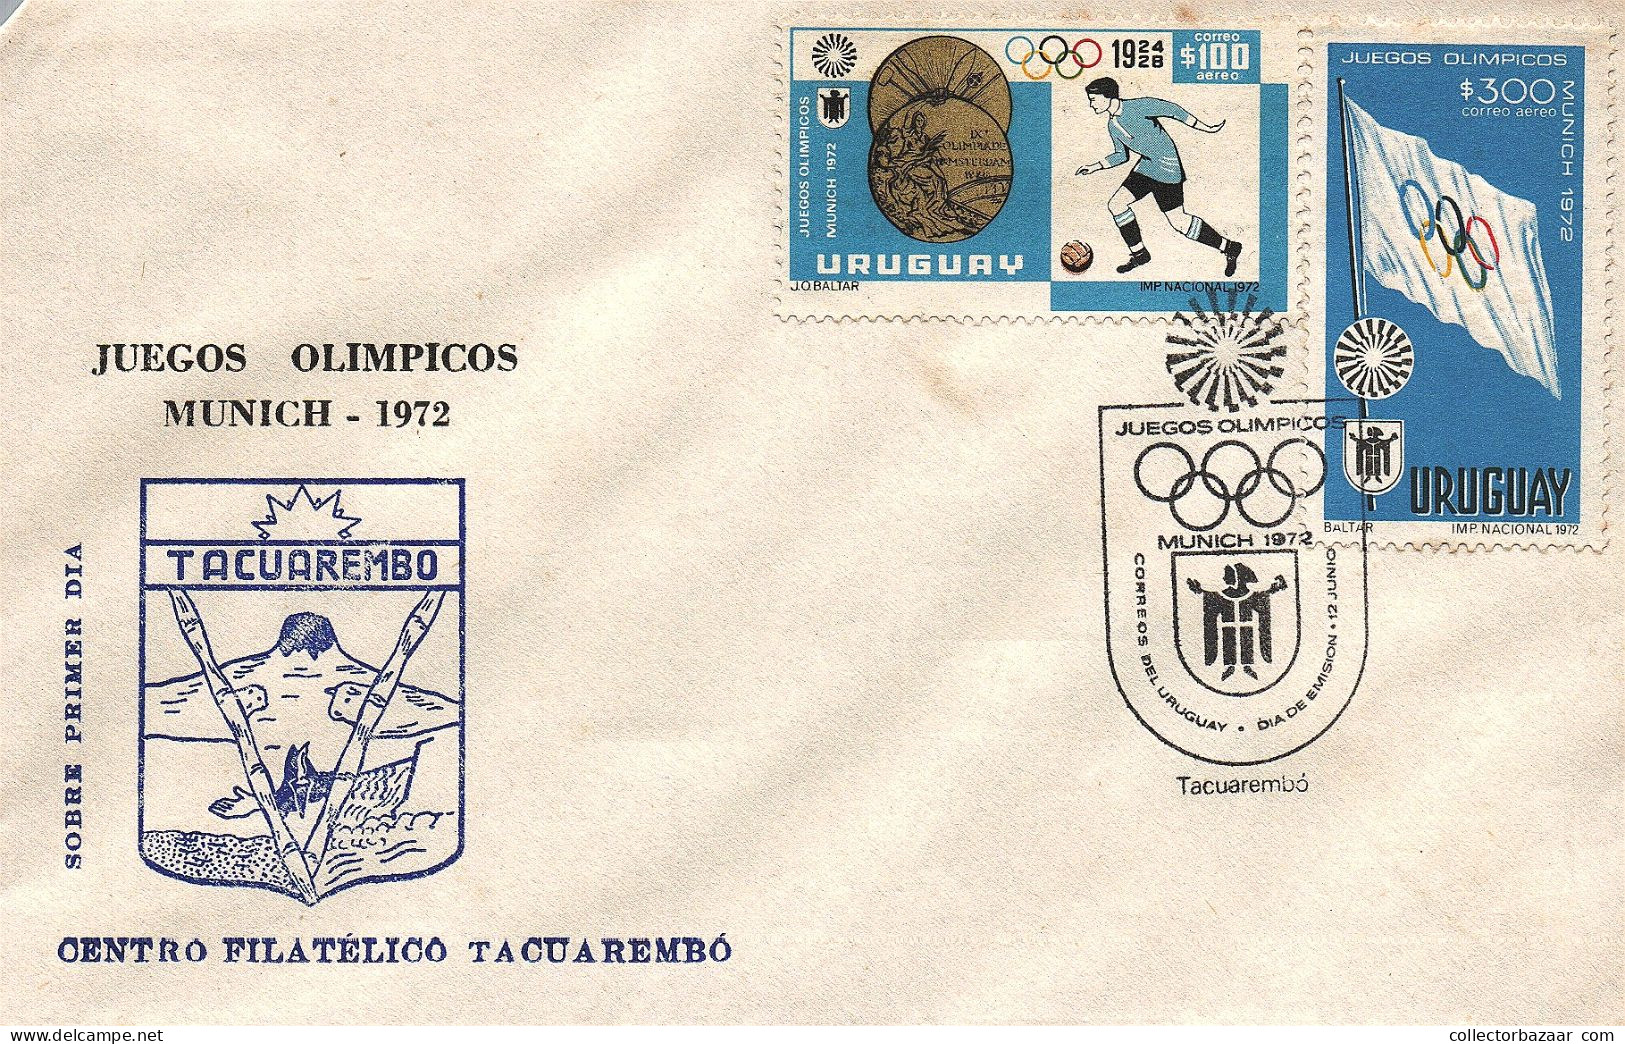 1972 Olympic Games Munich Uruguay FDC Flag And Soccer Gold Medal Anniversary Postmark Tacuarembo RR - Ete 1972: Munich